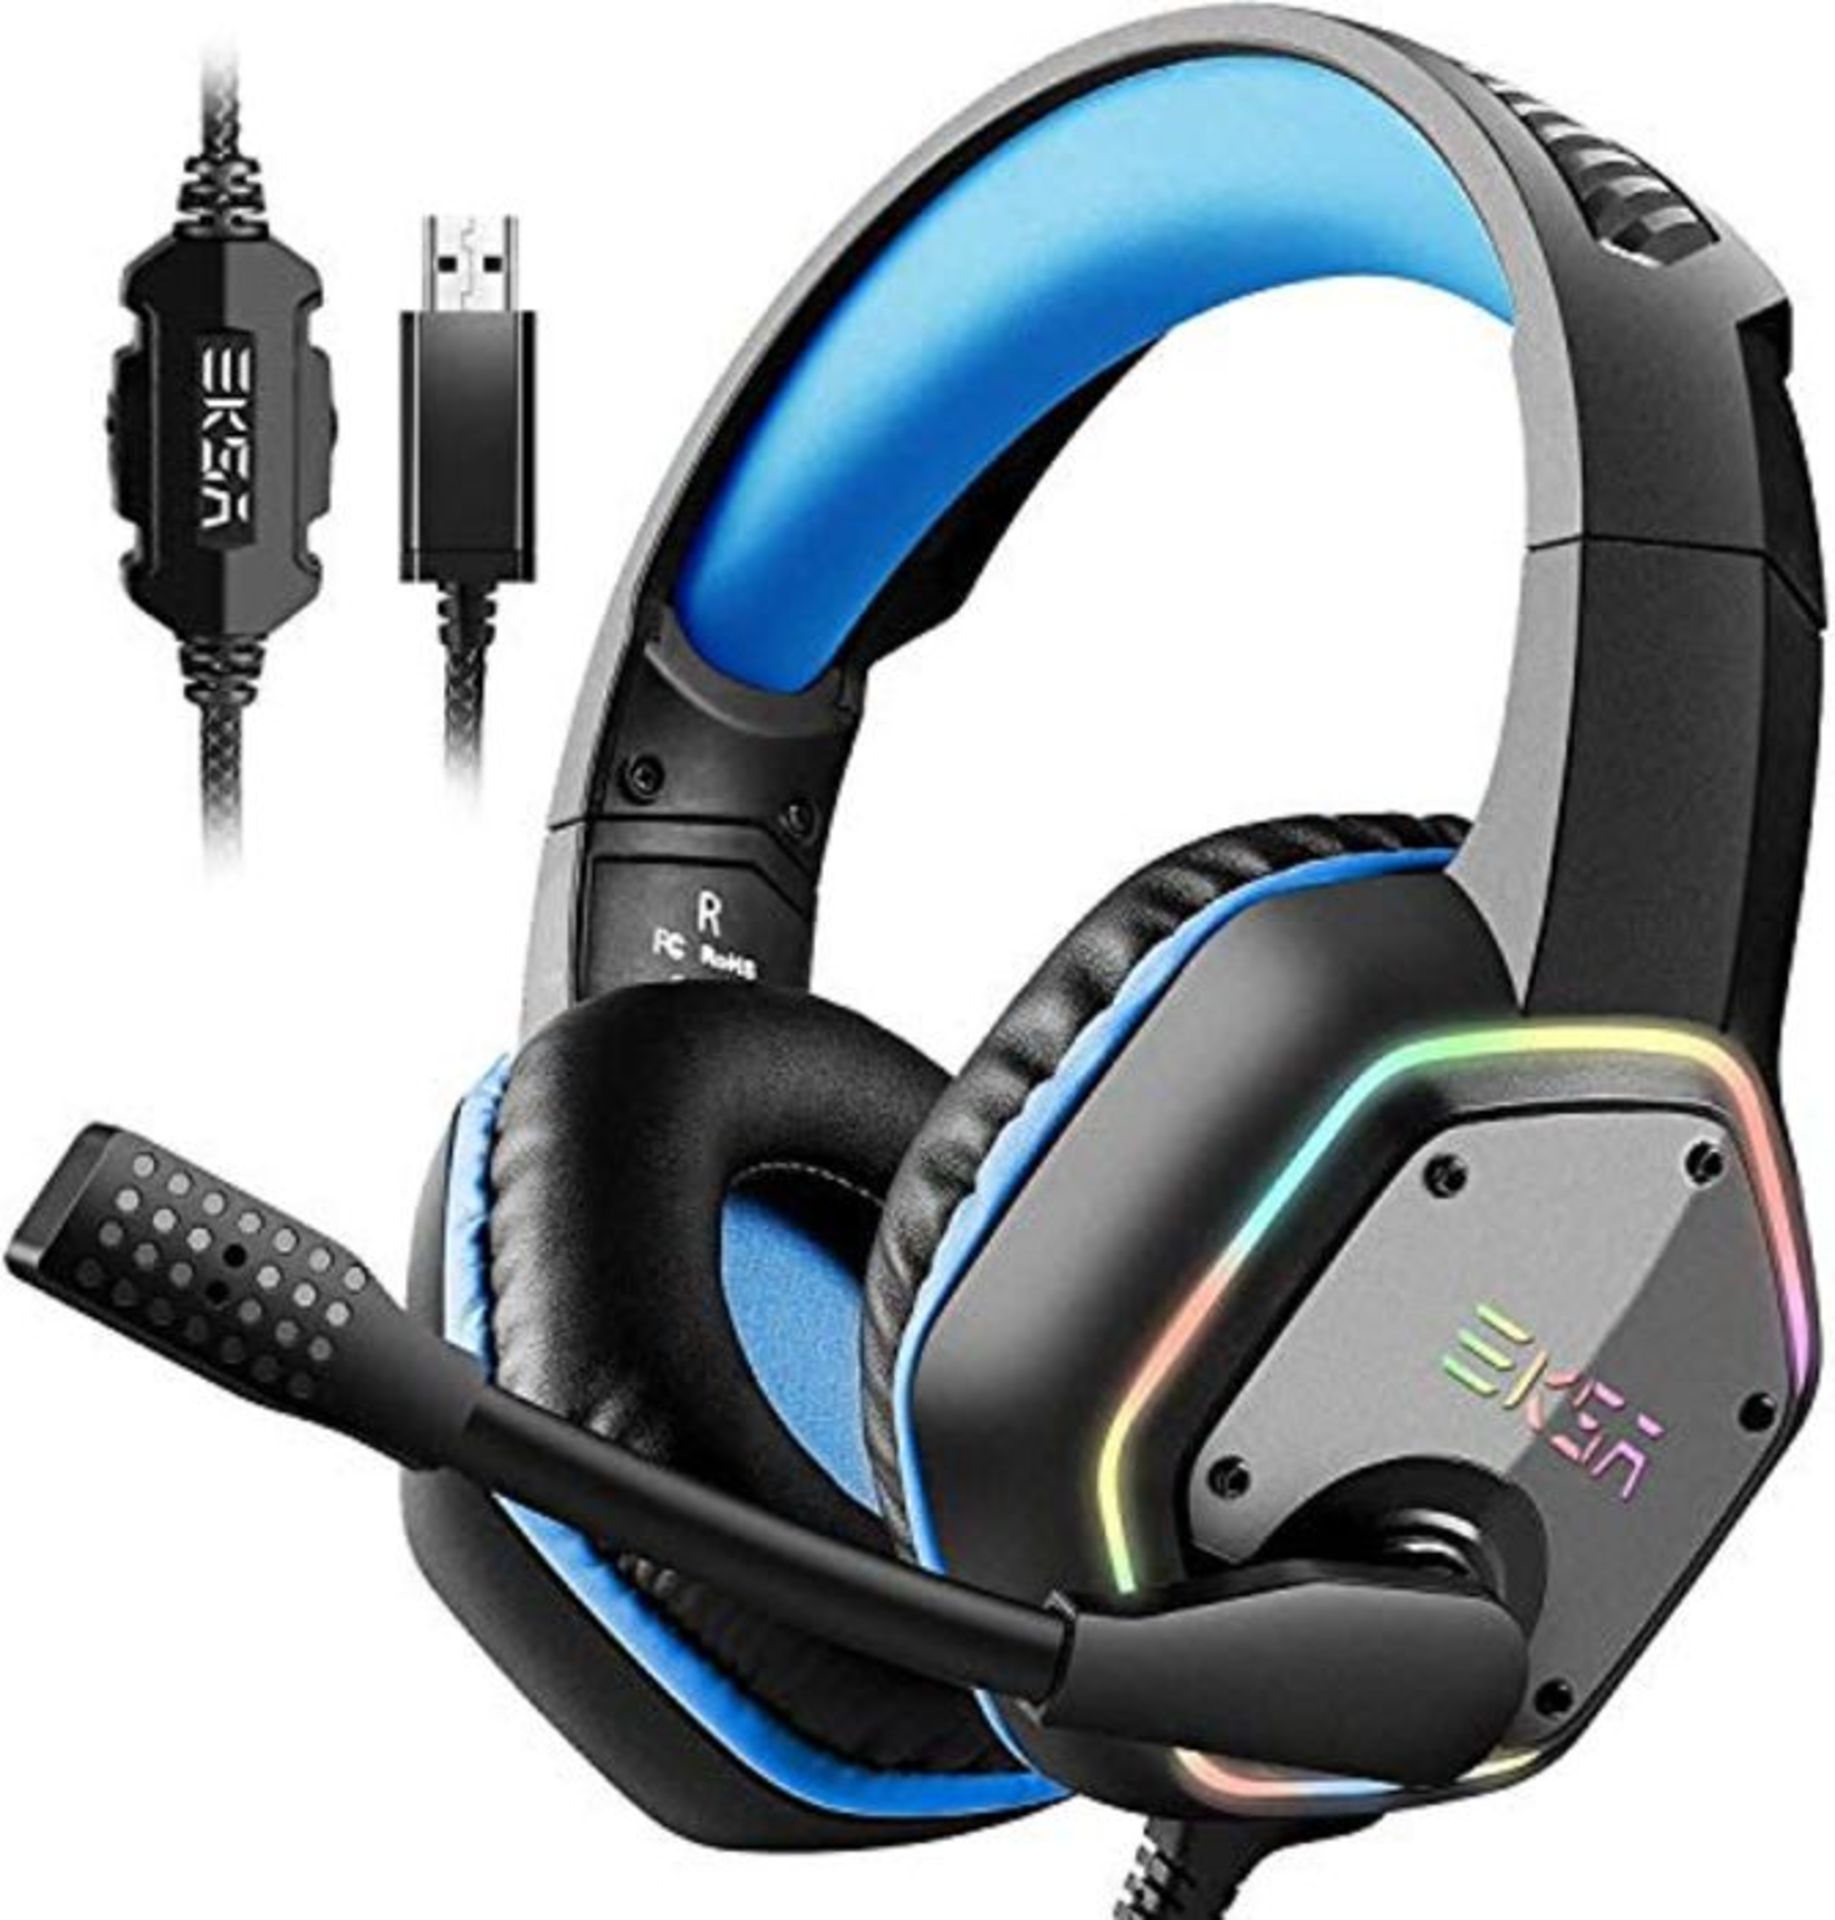 EKSA E1000 Gaming Headset for PS4 PC, Over-Ear Gaming Headphones with 7.1 Surround Sou